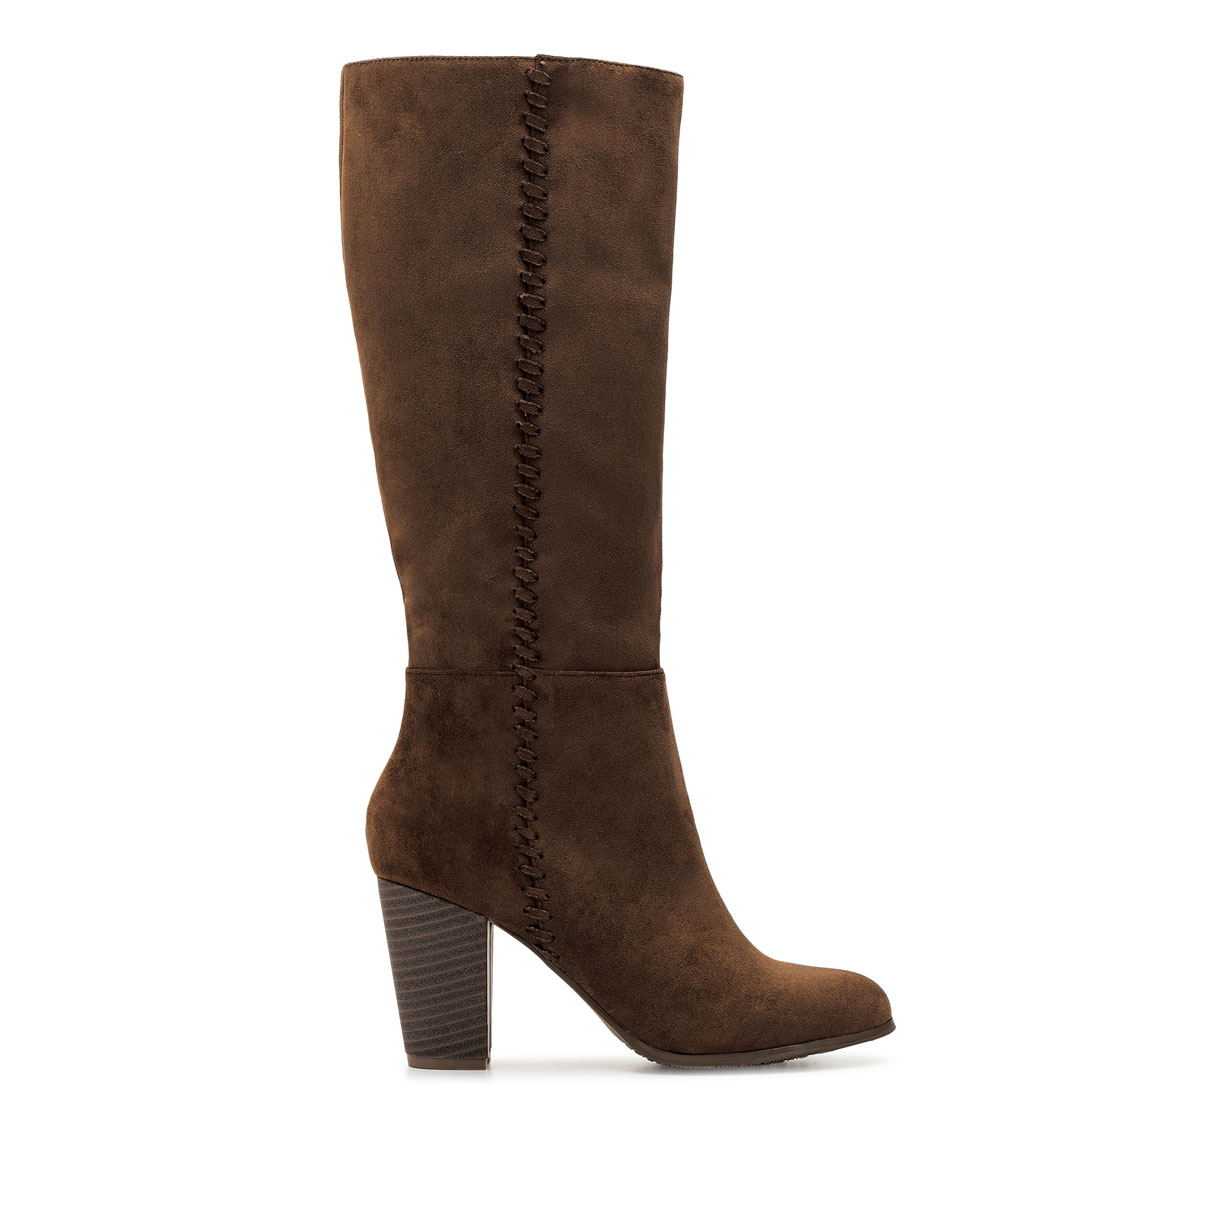 High Calf Boots in Brown Suedette 